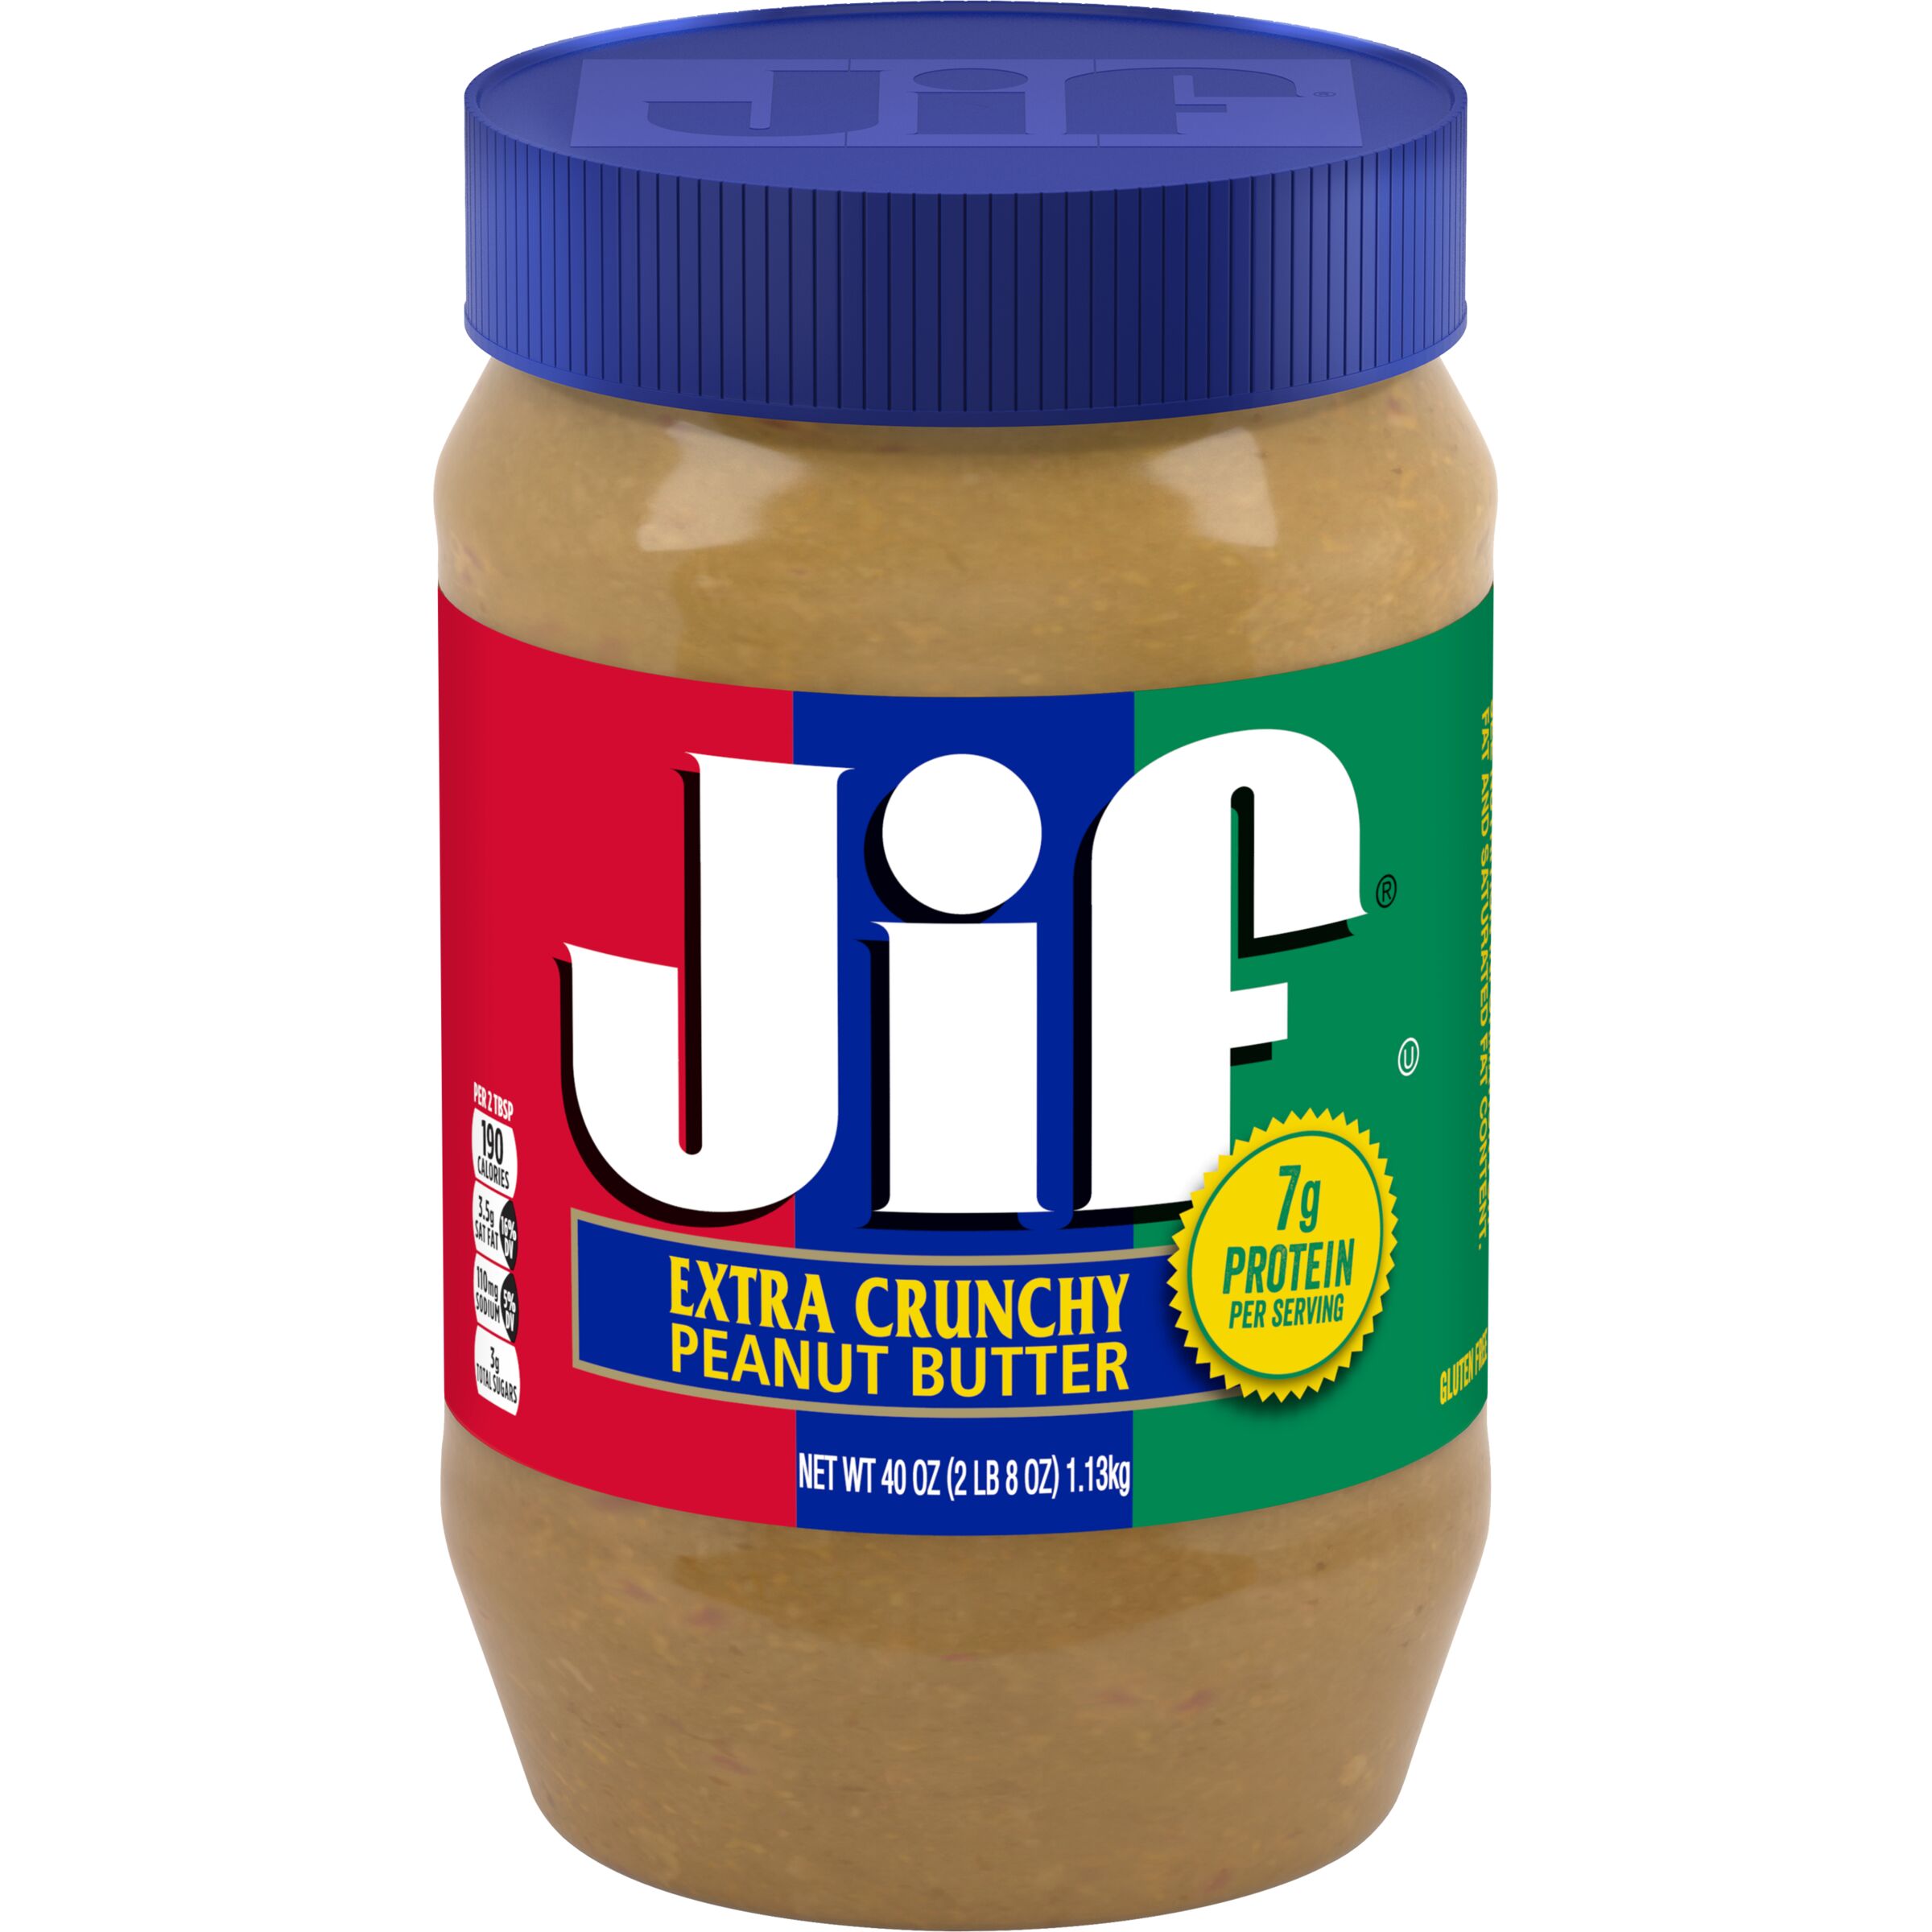 Jif Extra Crunchy Peanut Butter, 40-Ounce Jar - image 1 of 8